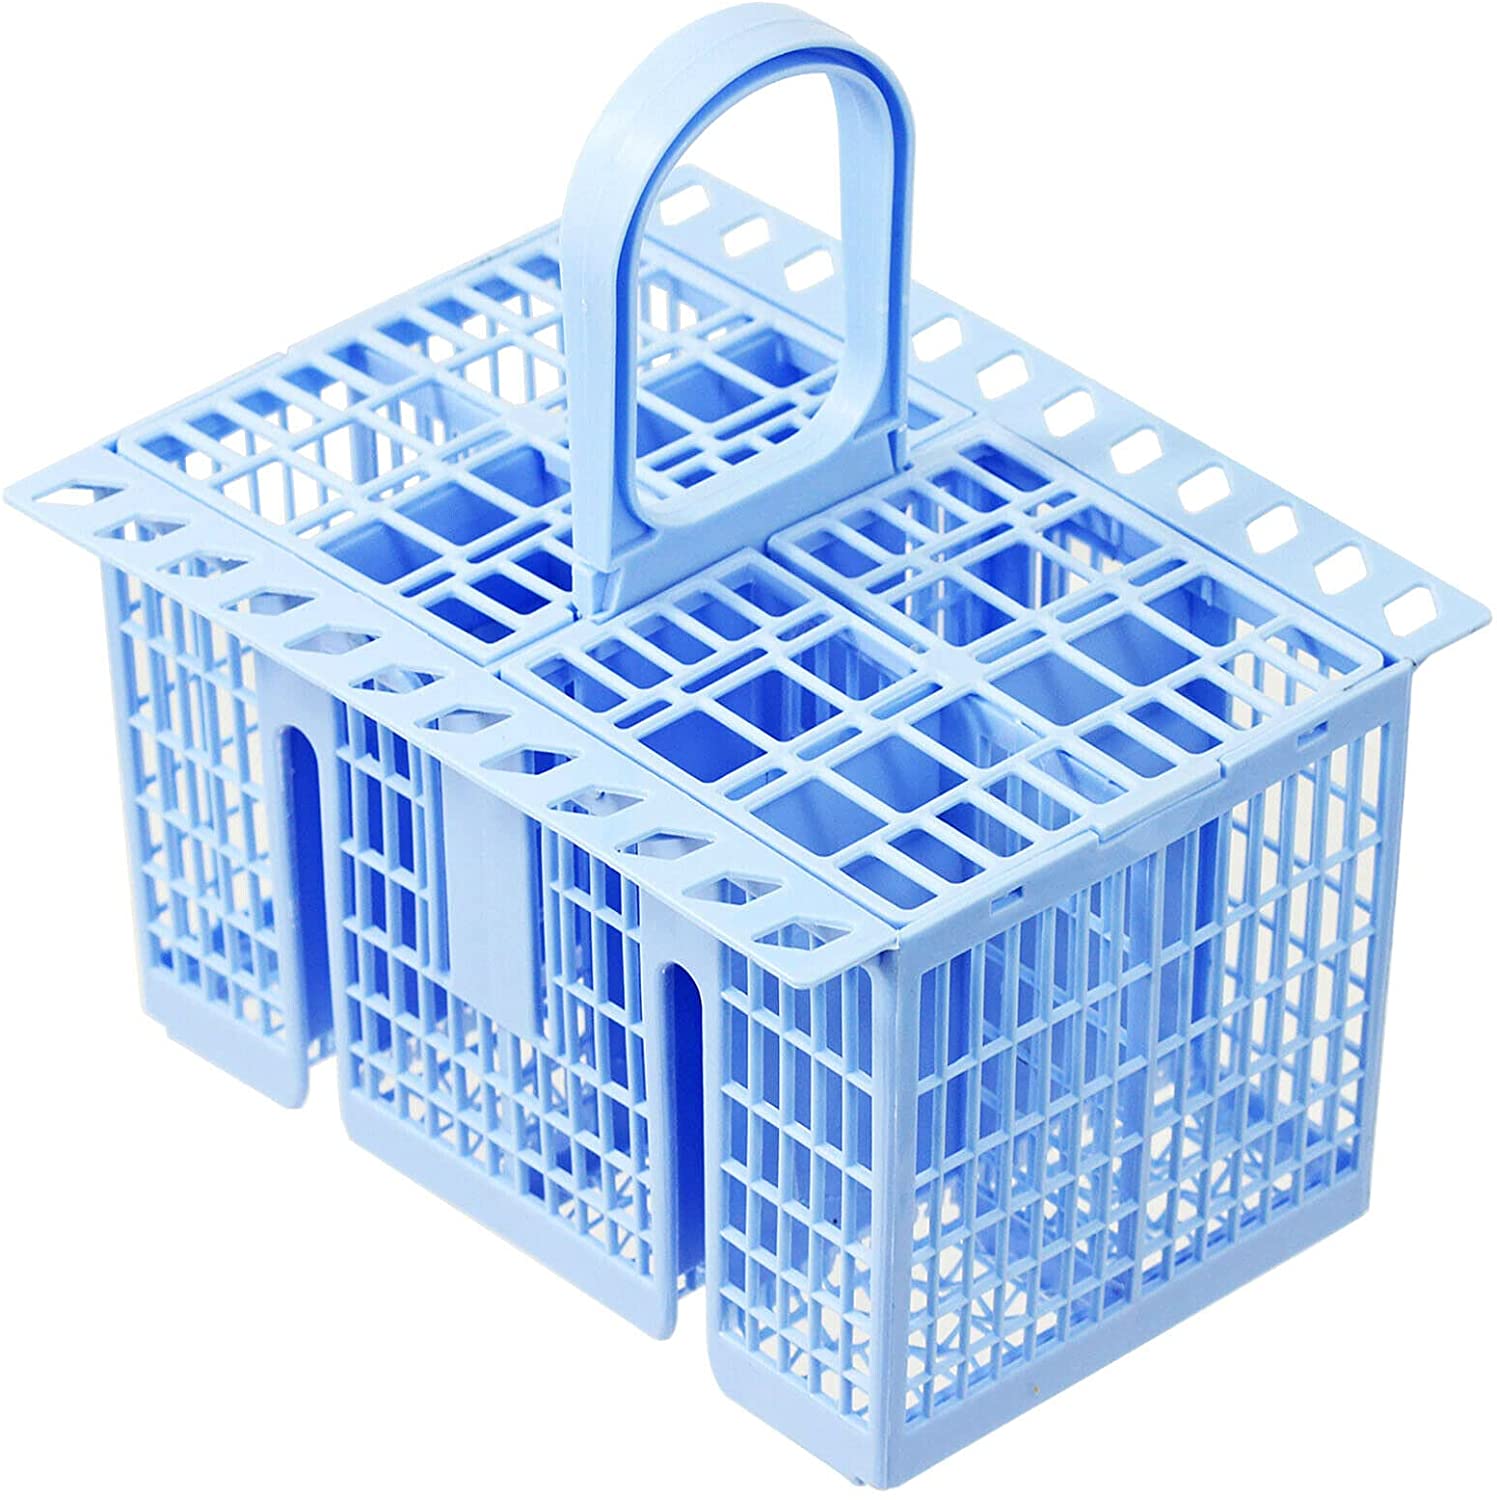 SPARES2GO Cutlery Basket compatible with White Knight Dishwasher (Blue, 220 x 208 x 160mm)